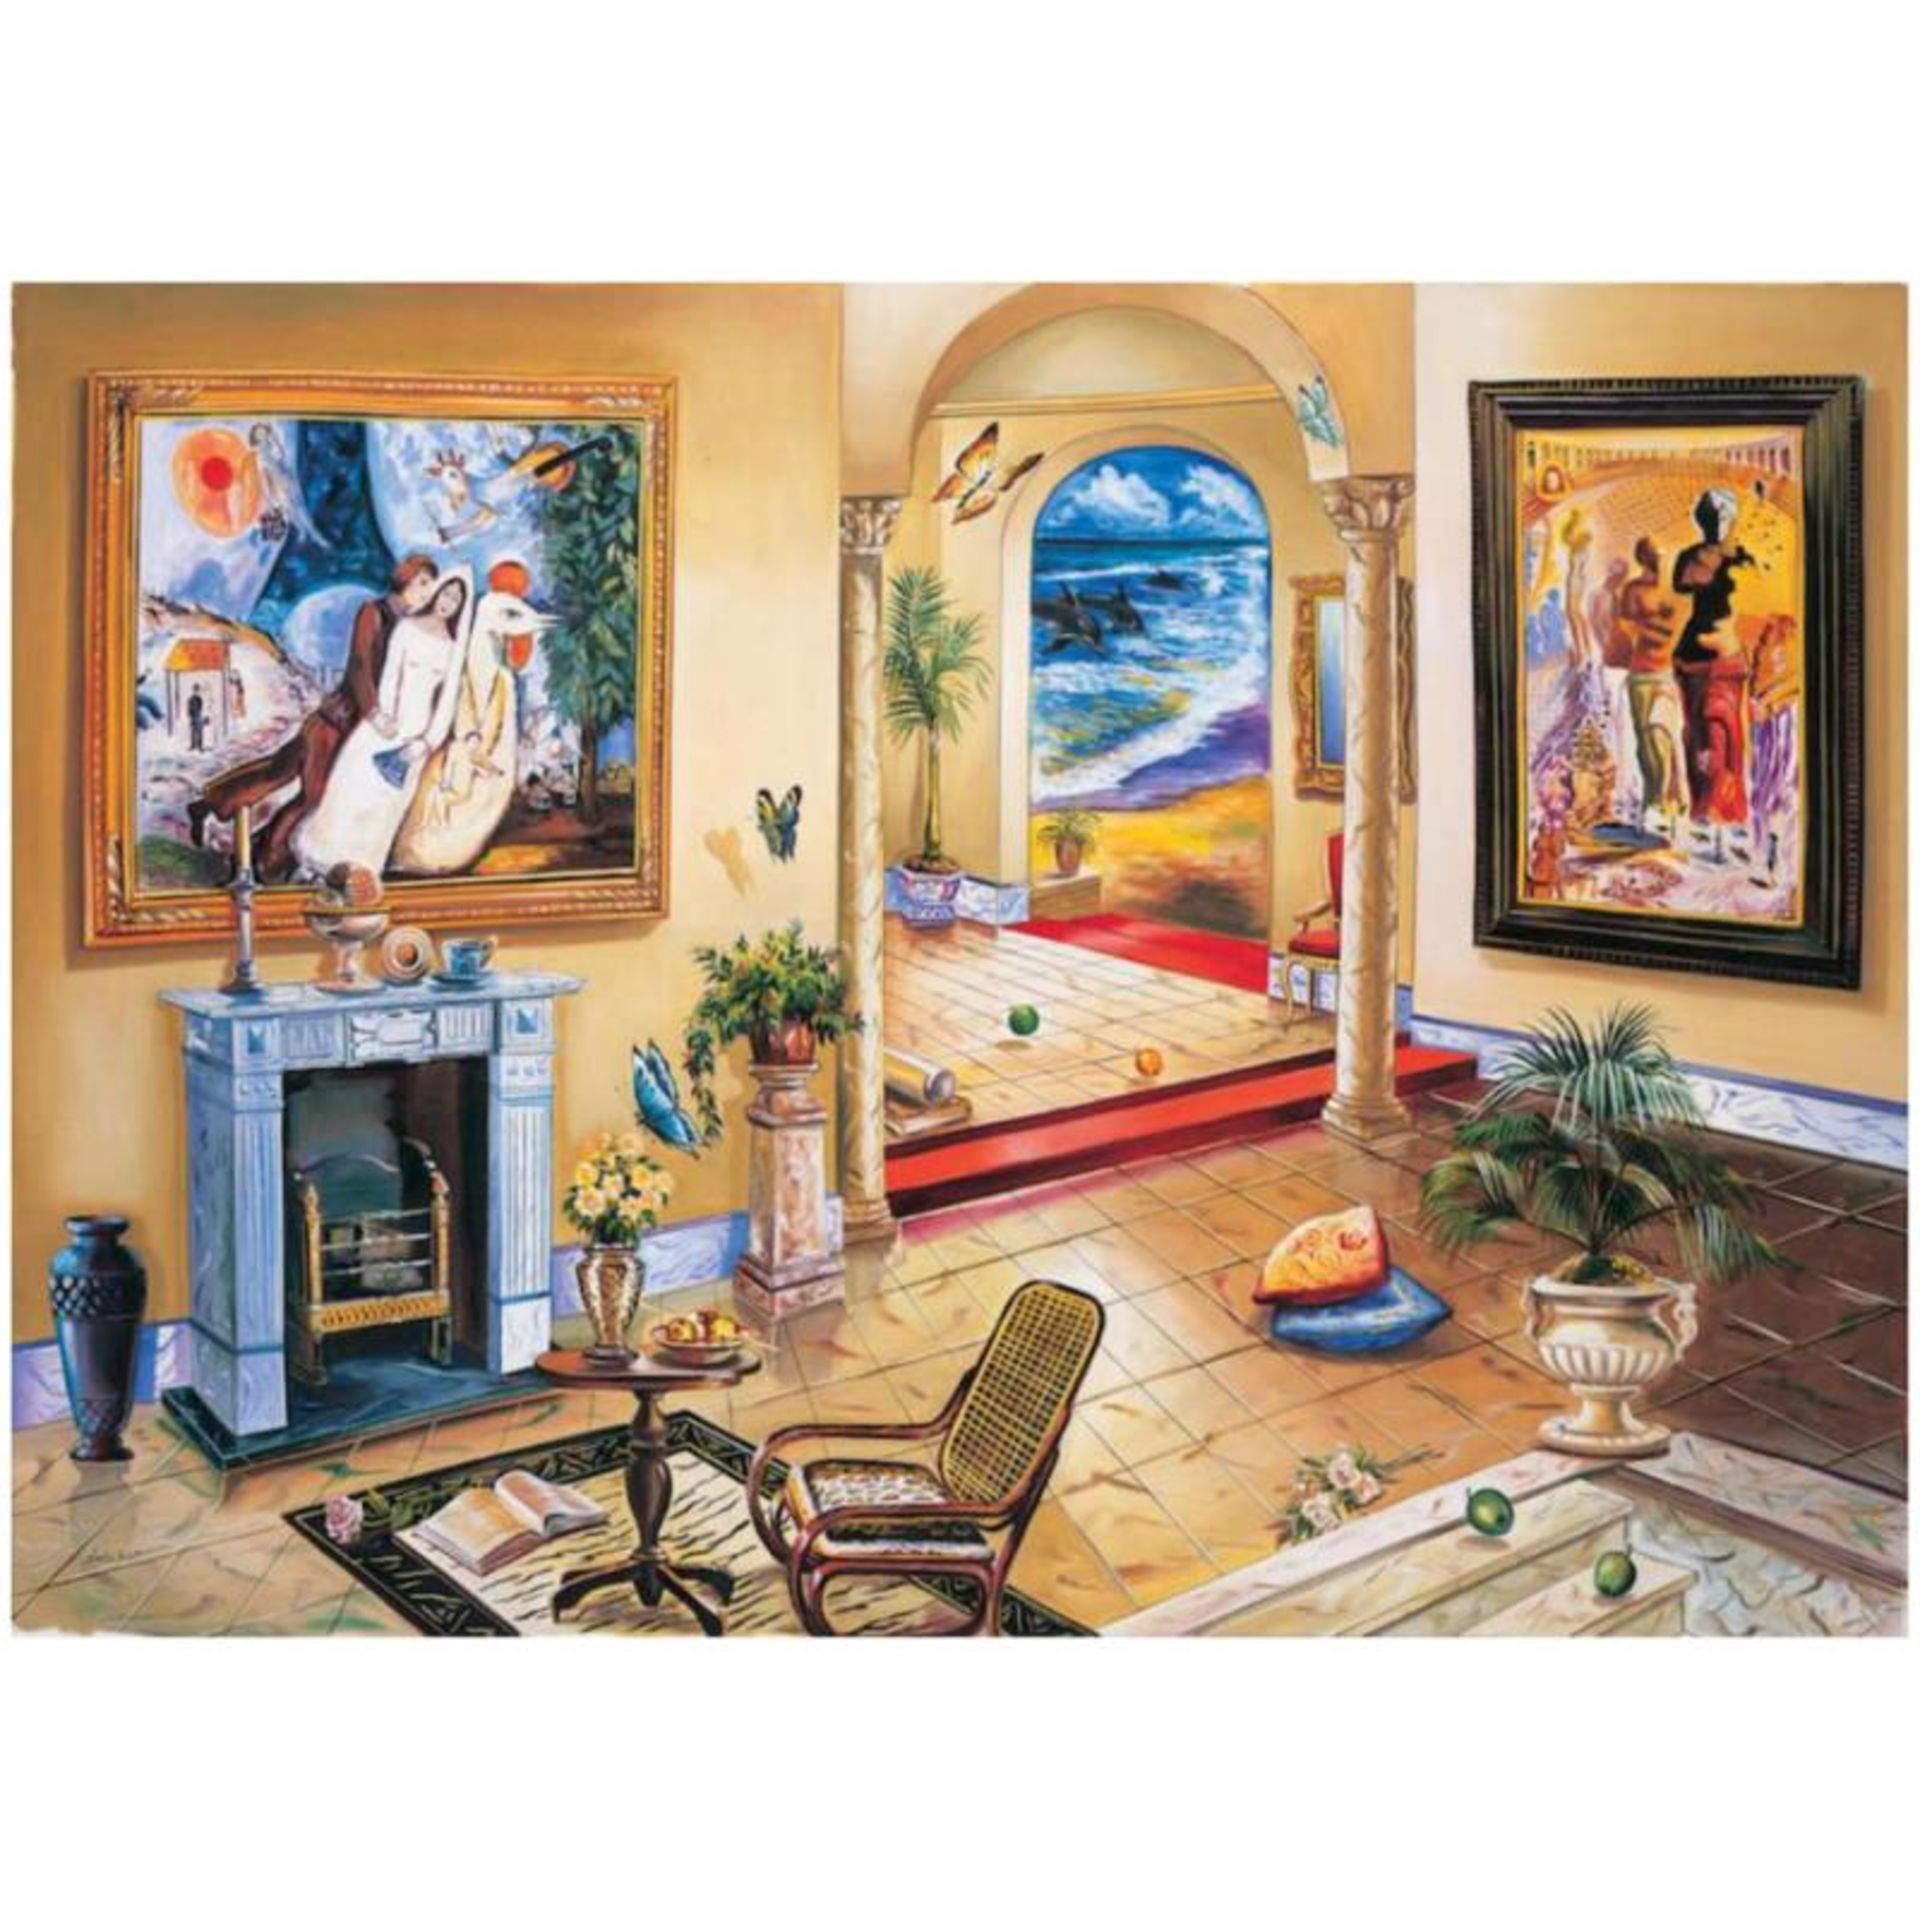 Alexander Astahov, "Interior with Chagall" Hand Signed Limited Edition Giclee on